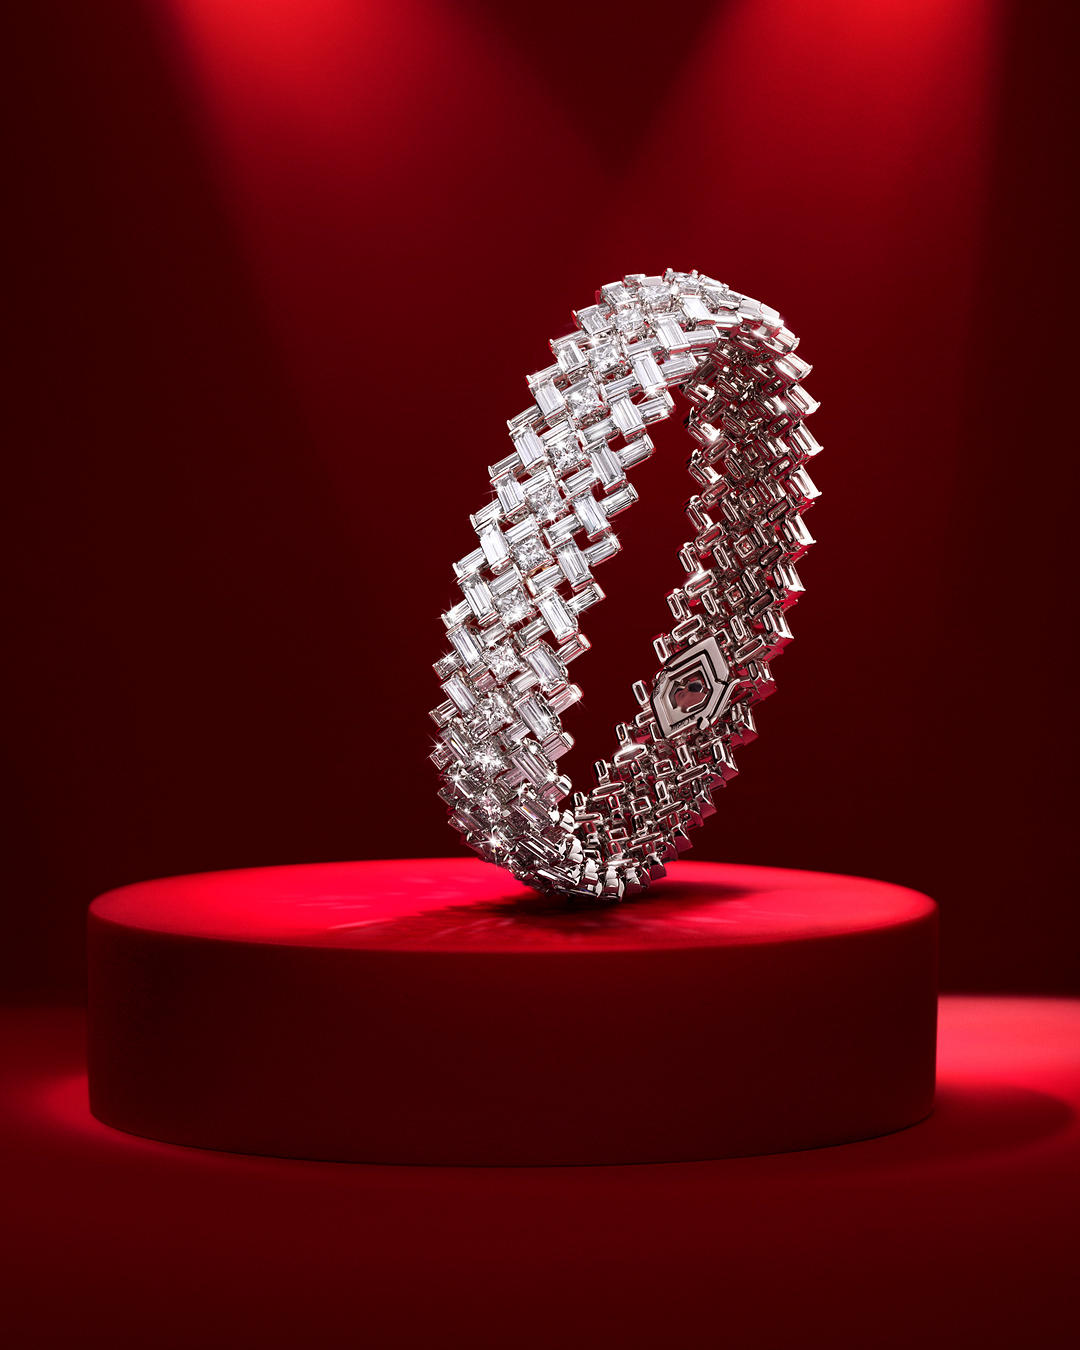 Cartier Official - Cartier's diamond gifts create achitectures of light with a dazzling charm